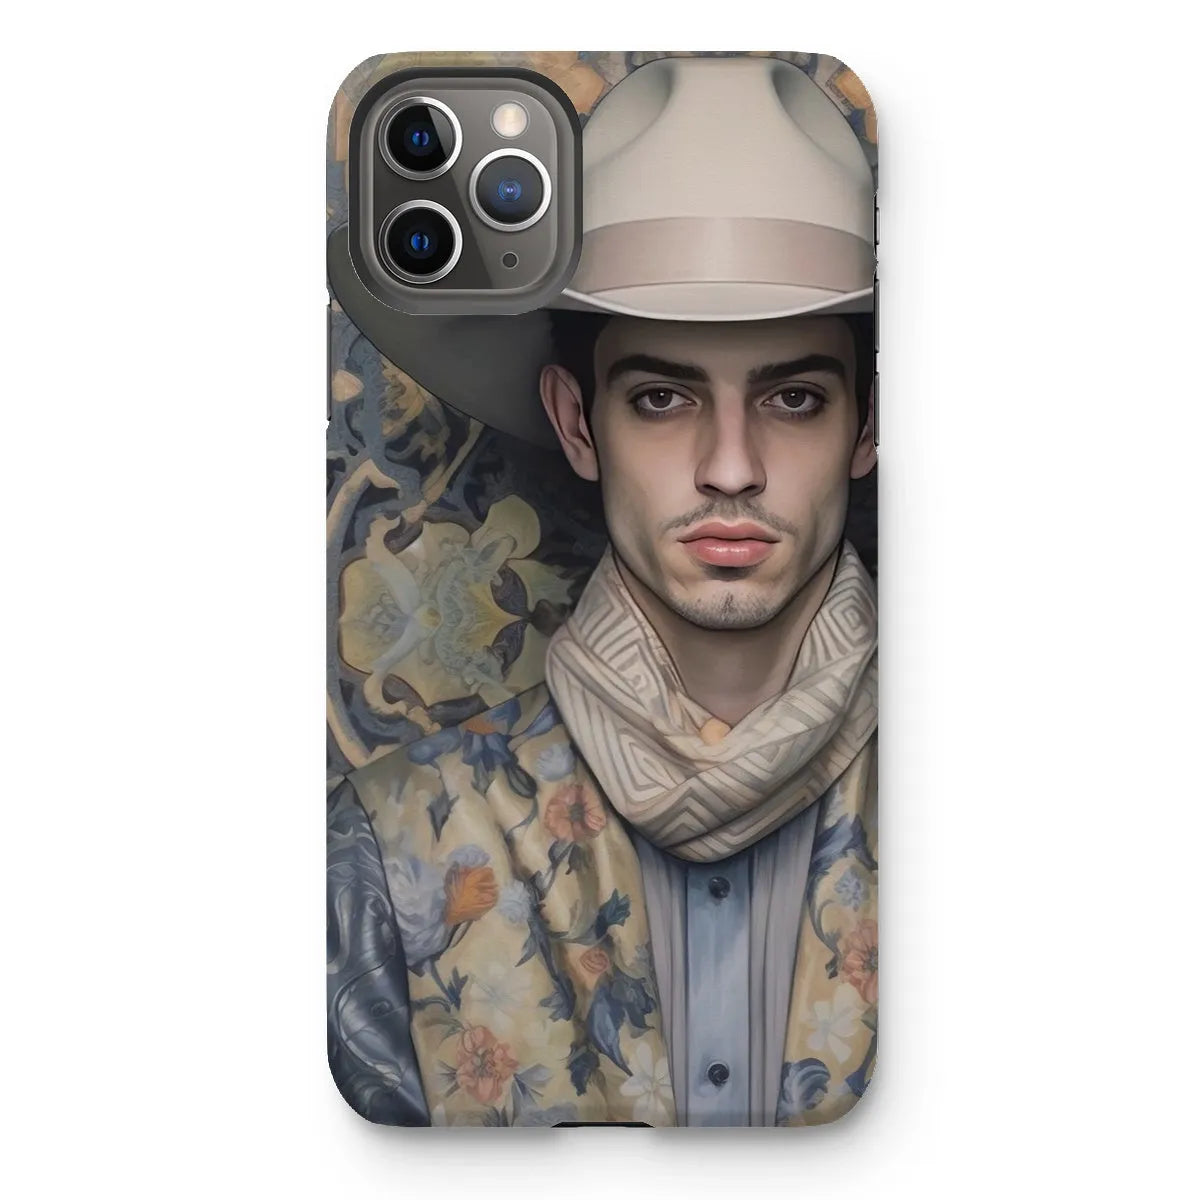 Farzad The Gay Cowboy - Dandy Gay Men Art Phone Case - Iphone 11 Pro Max / Matte - Mobile Phone Cases - Aesthetic Art